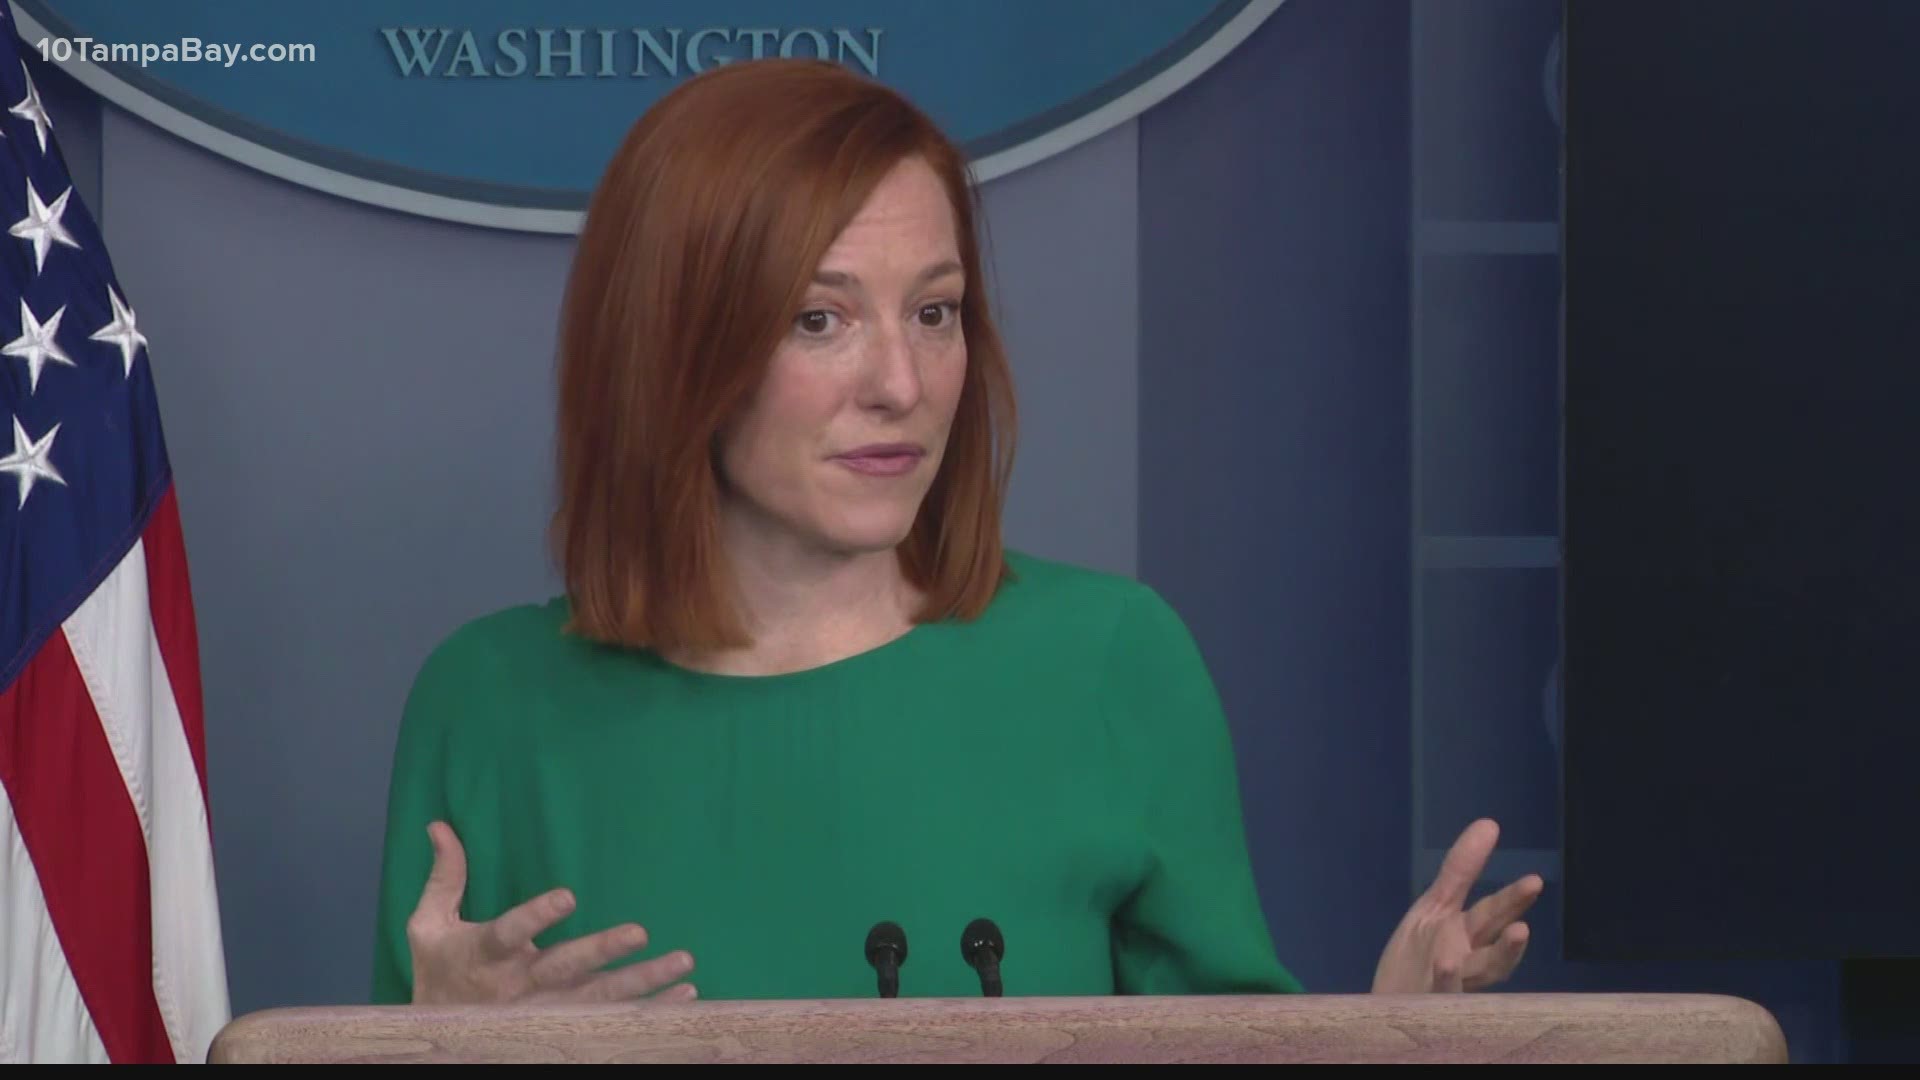 Press secretary Jen Psaki responded to Gov. Ron DeSantis' criticism of a federal approach to vaccine distribution and his call for more vaccines needed in the state.